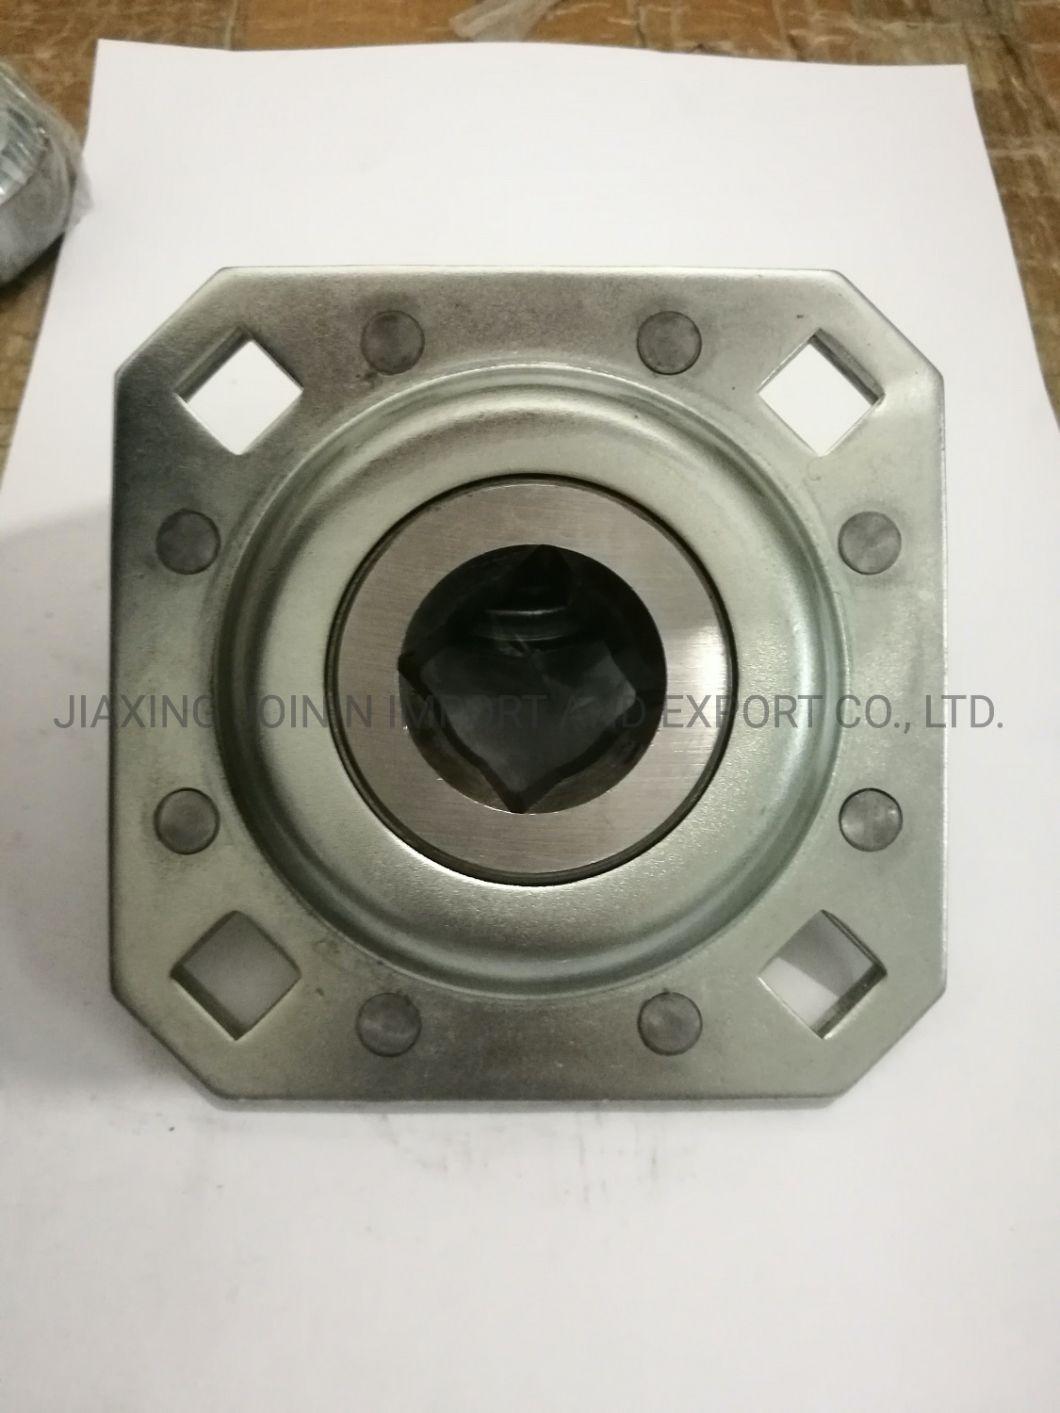 Fd208r1 High Quality Non-Relubricable Agricultural Bearing with Stamping Housing Square Bore Heavy Duty Farm Machinery Bearing Housing